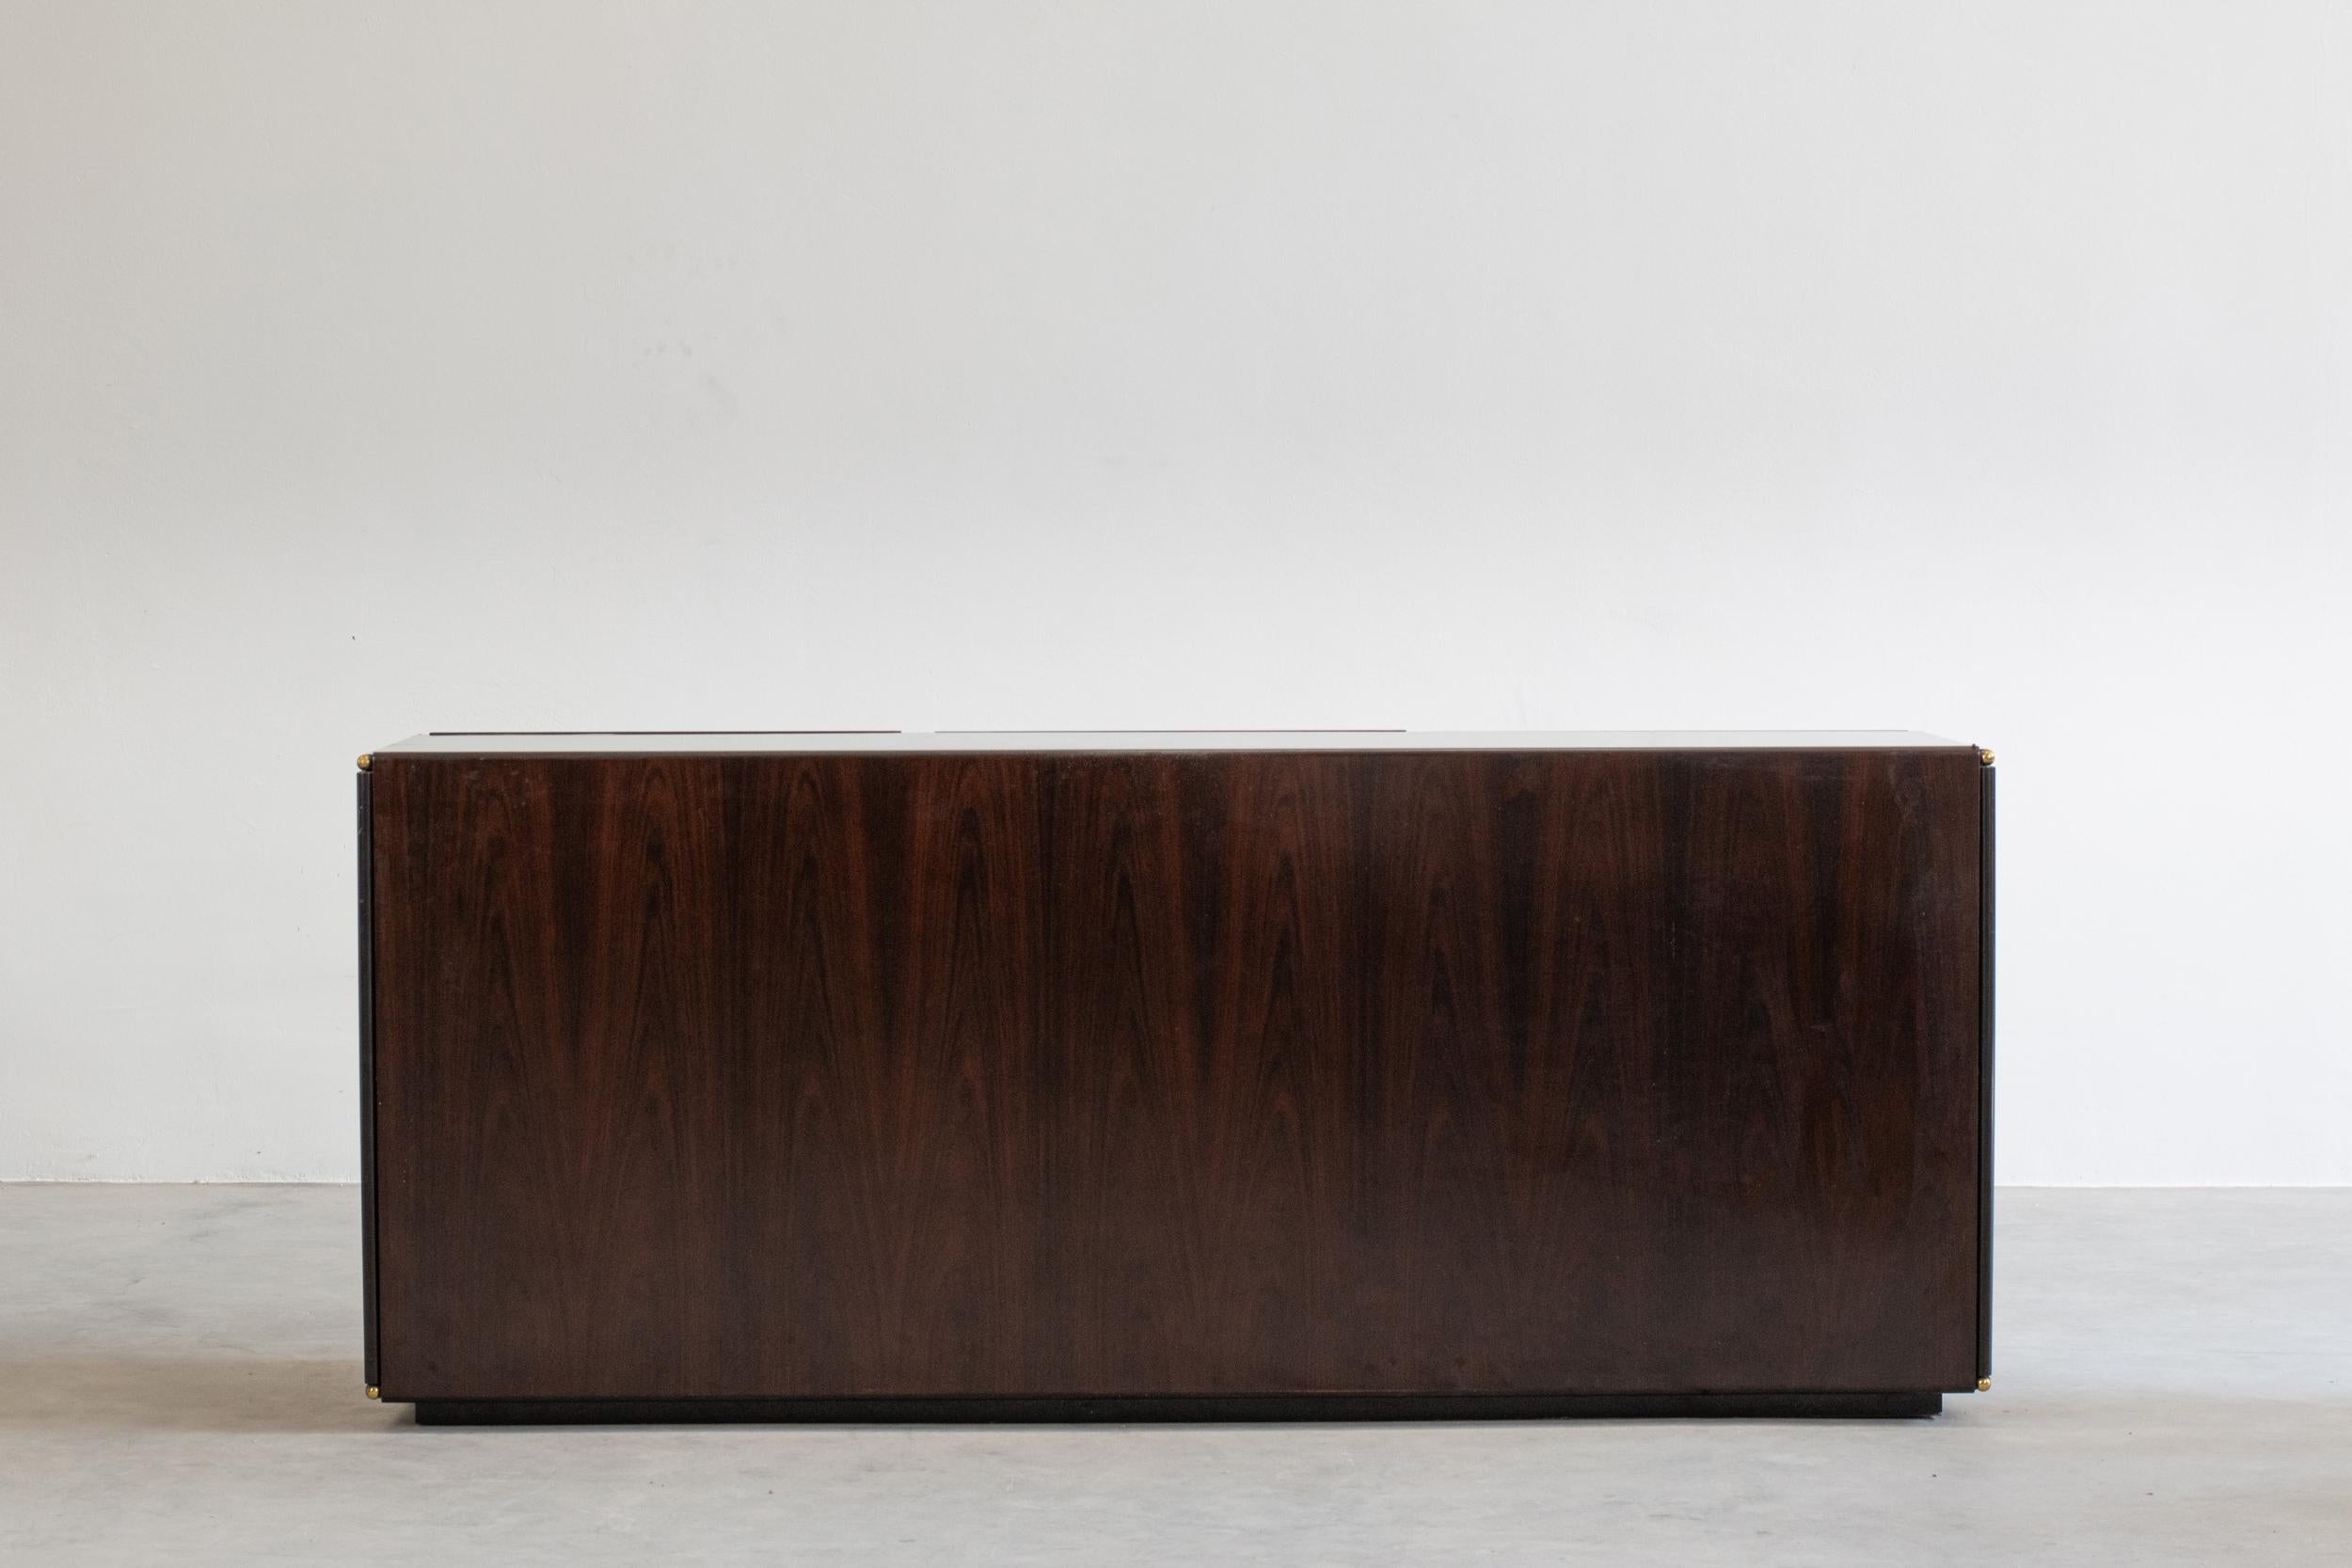 Midcentury Rosewood Sideboard, Italian Manufacture, 1950s For Sale 2